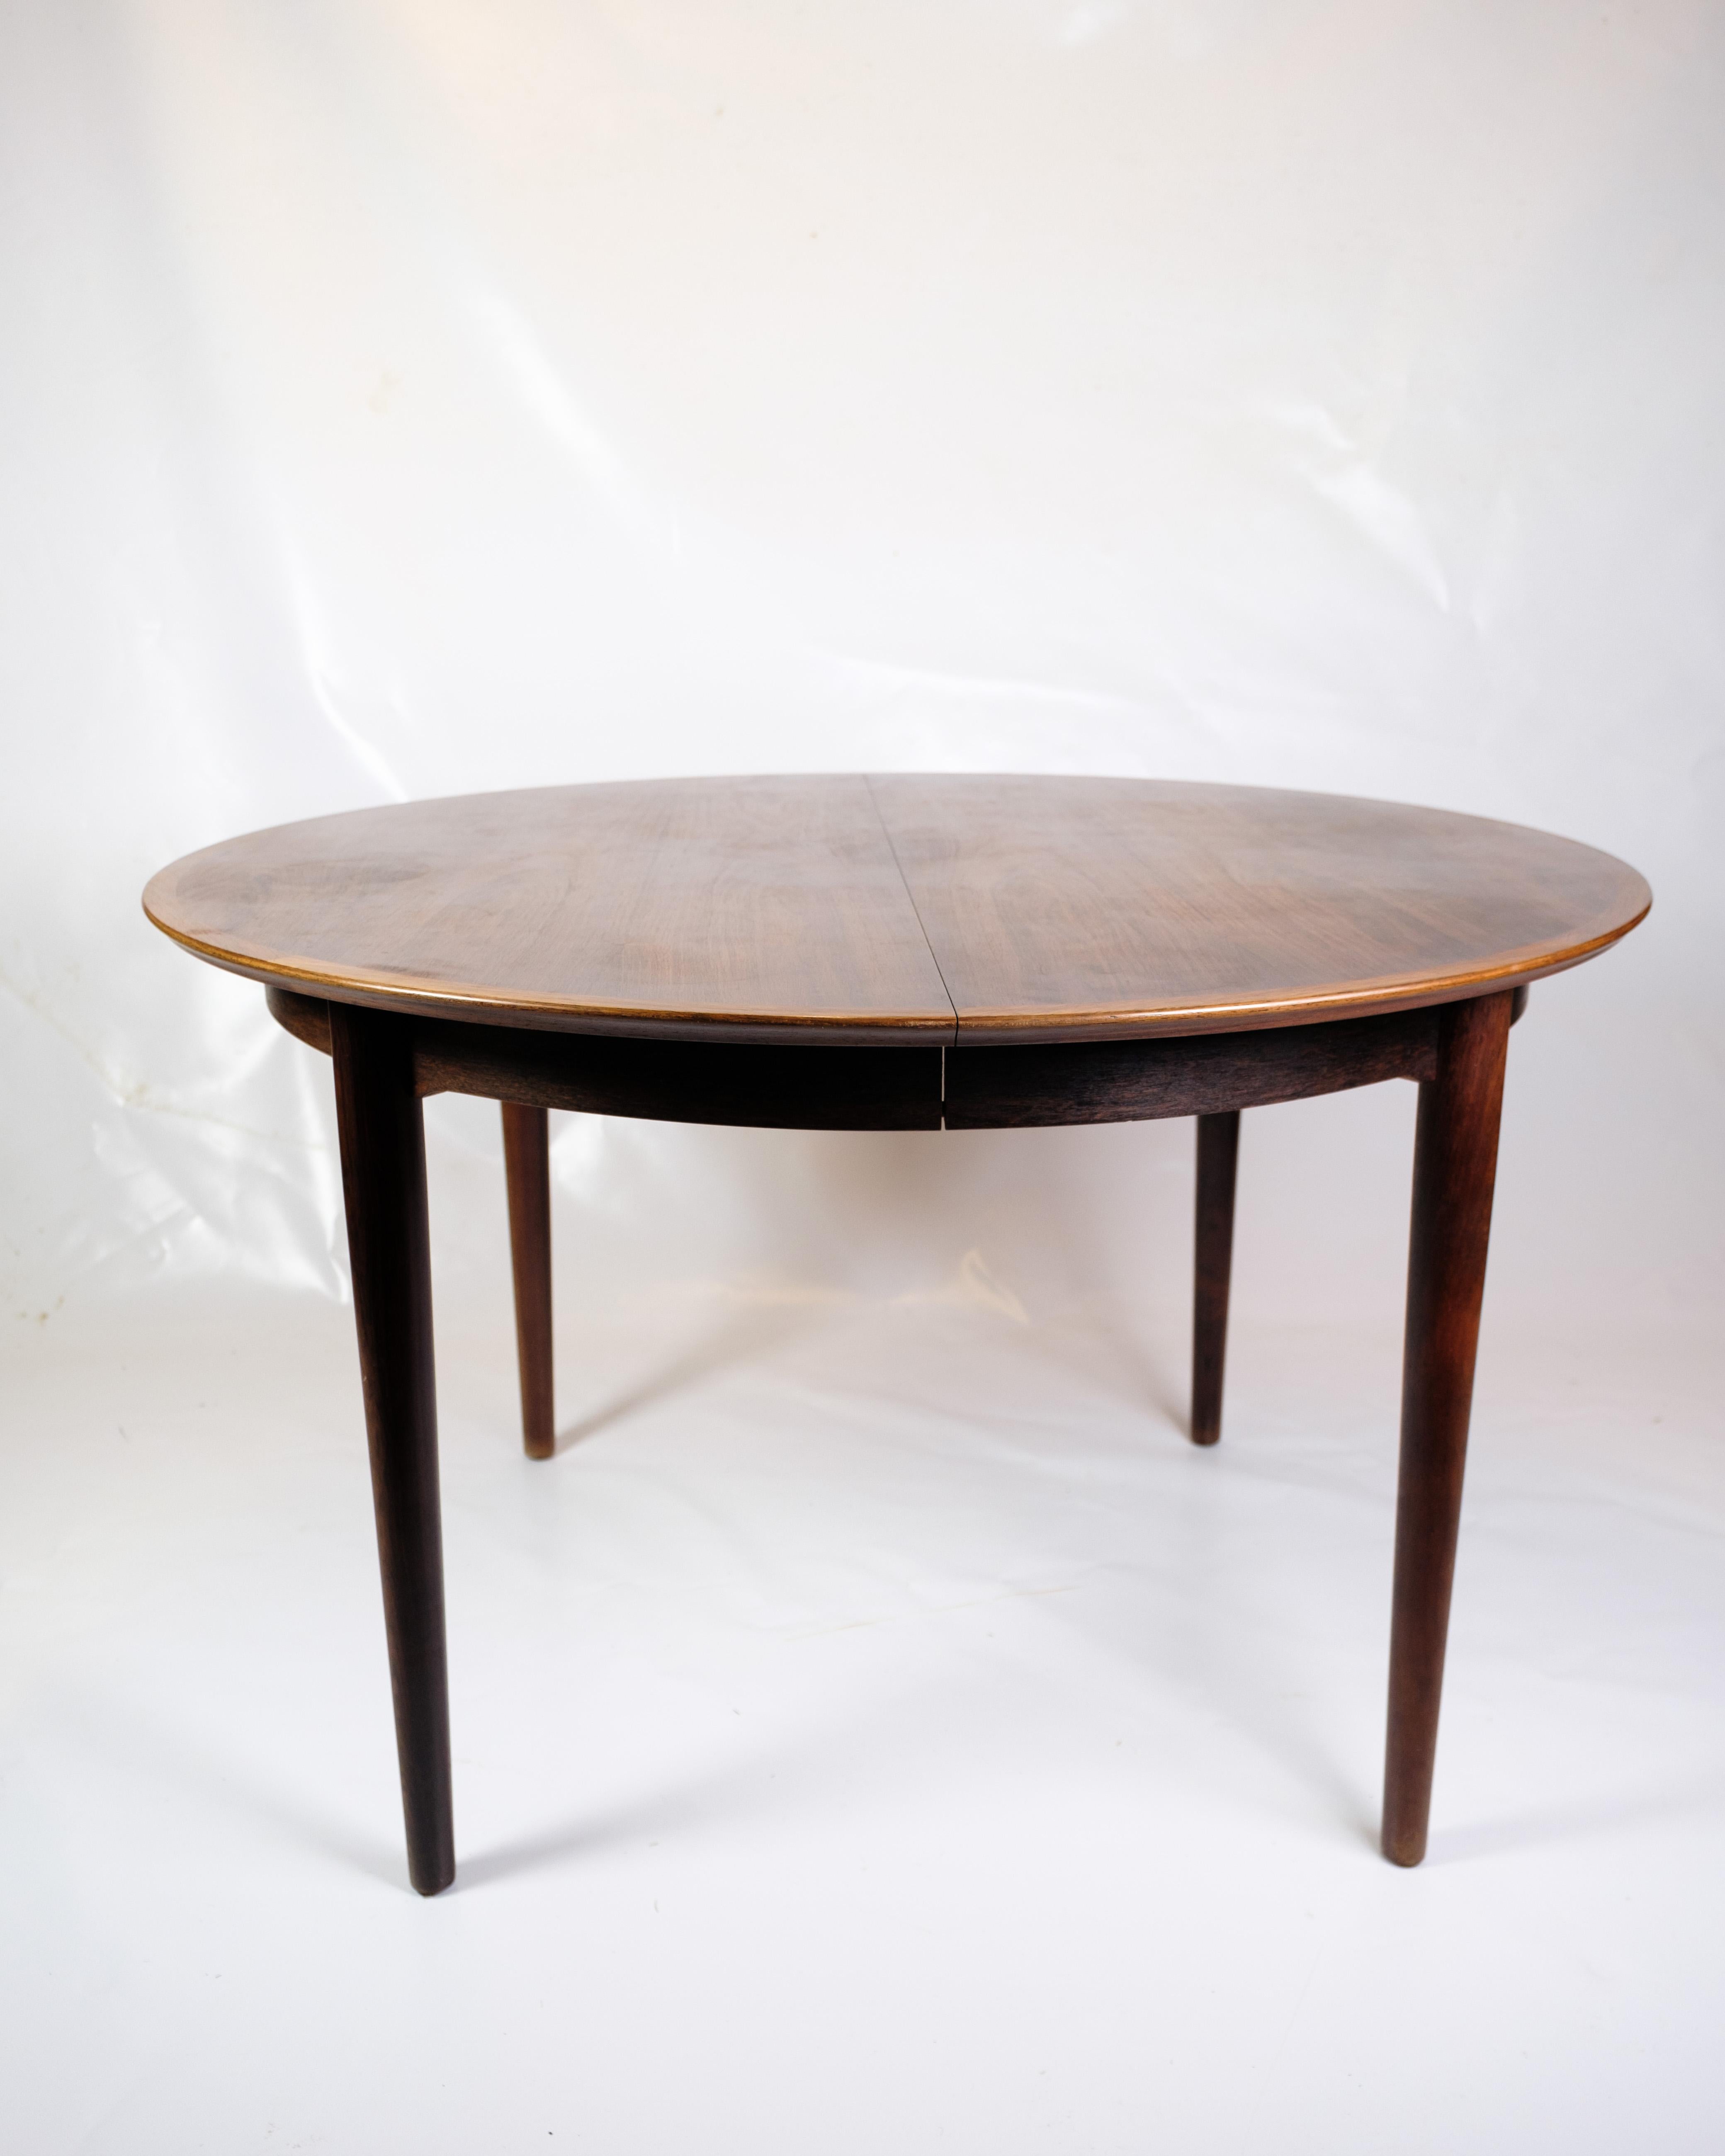 Mid-Century Modern Round Dining Table Made In Rosewood By Arne Vodder From 1960s For Sale